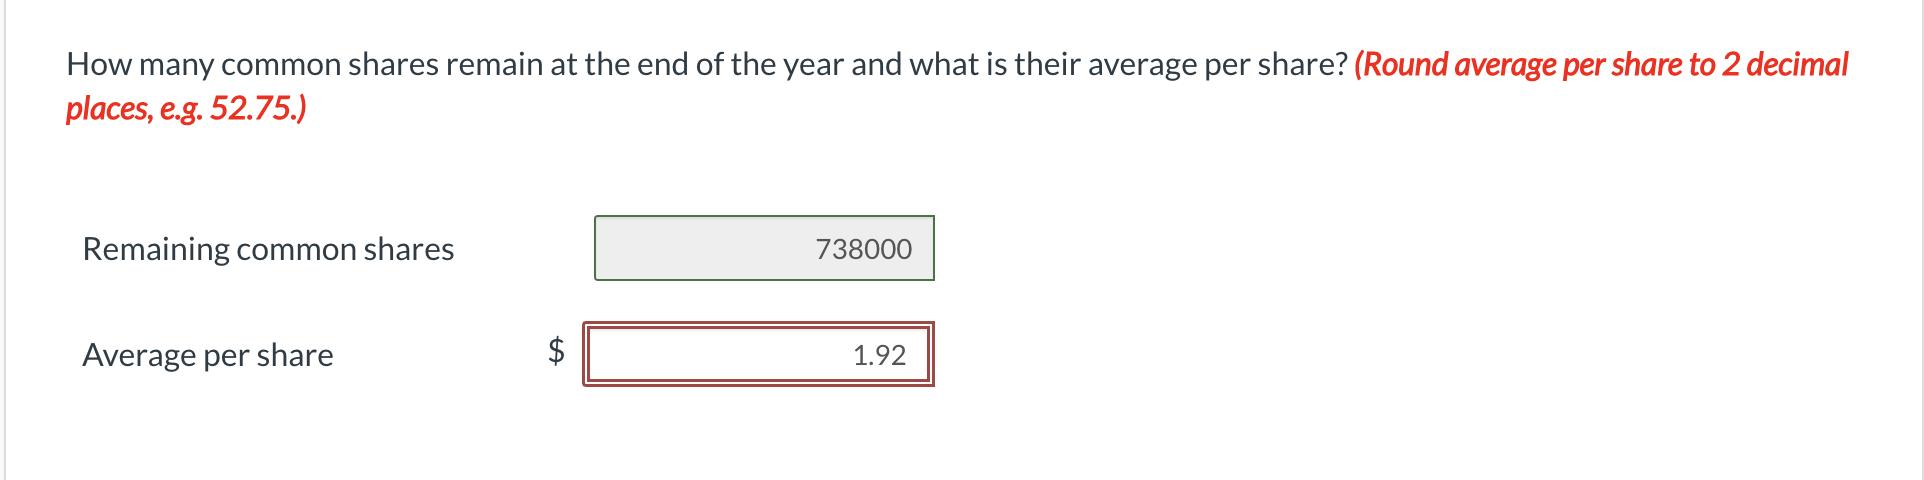 How many common shares remain at the end of the year and what is their average per share? (Round average per share to 2 decim